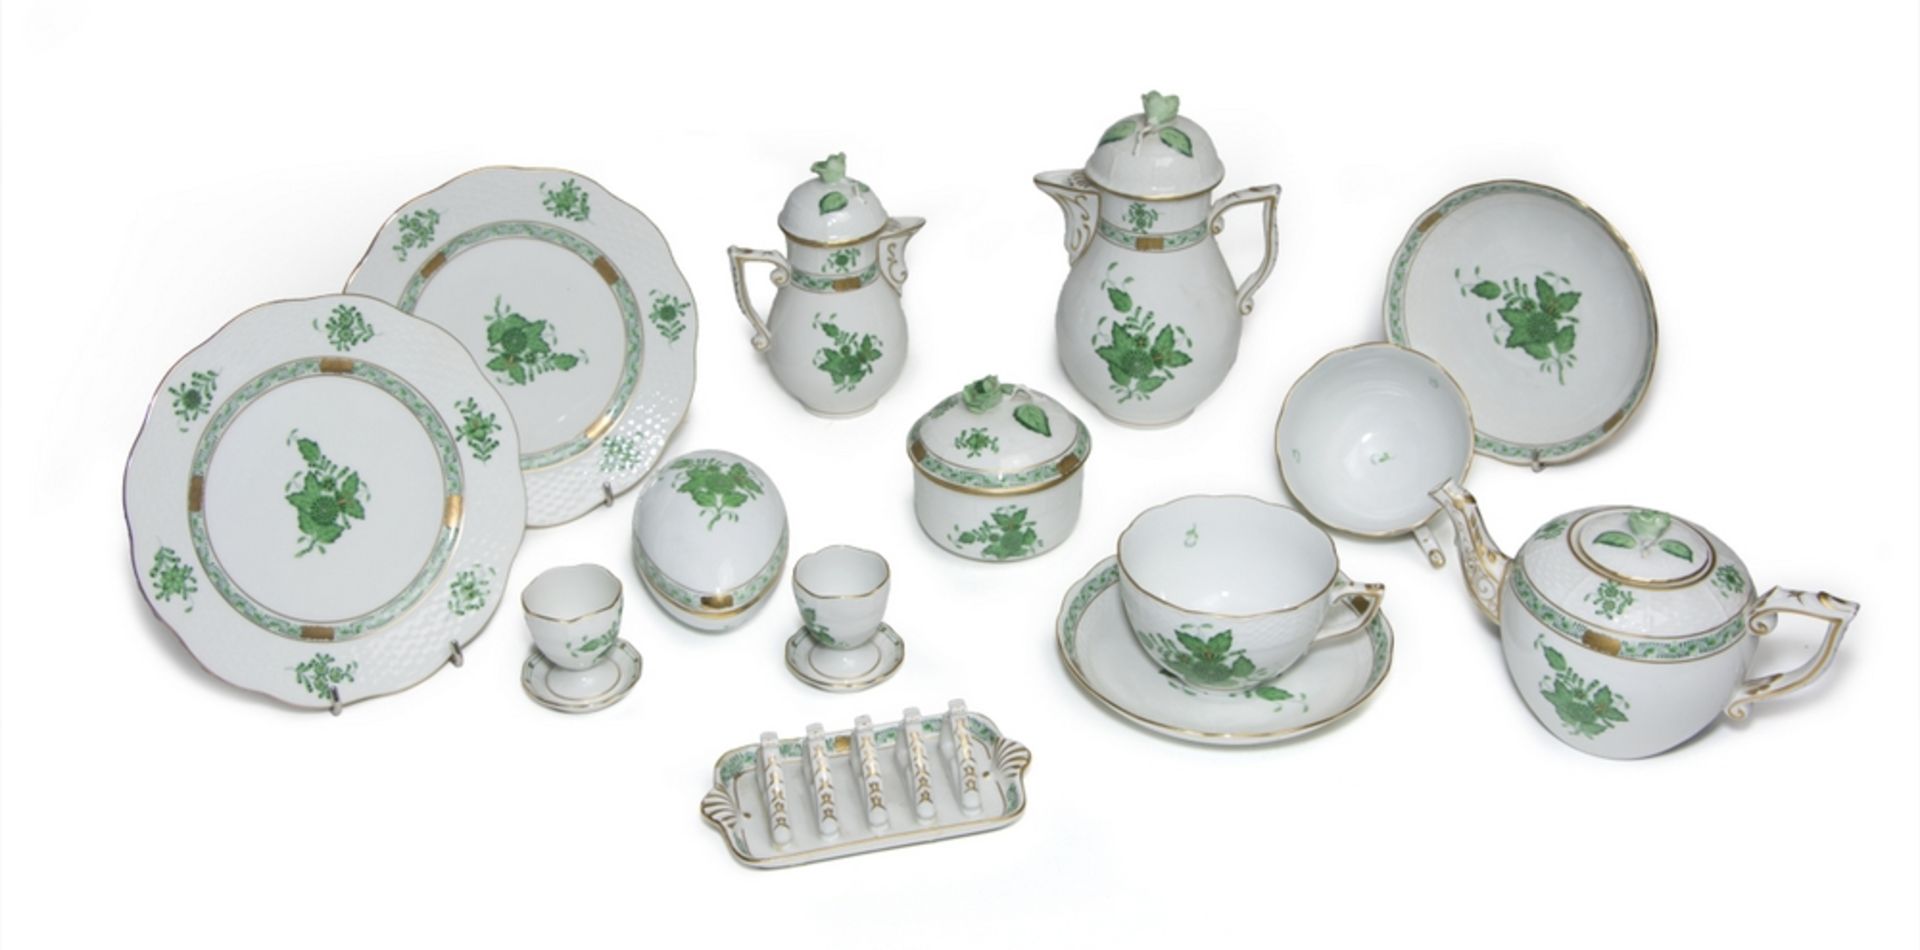 TEA SERVICE IN PORCELAIN, HEREND XX CENTURY in white and green enamel, with decorations in leaves